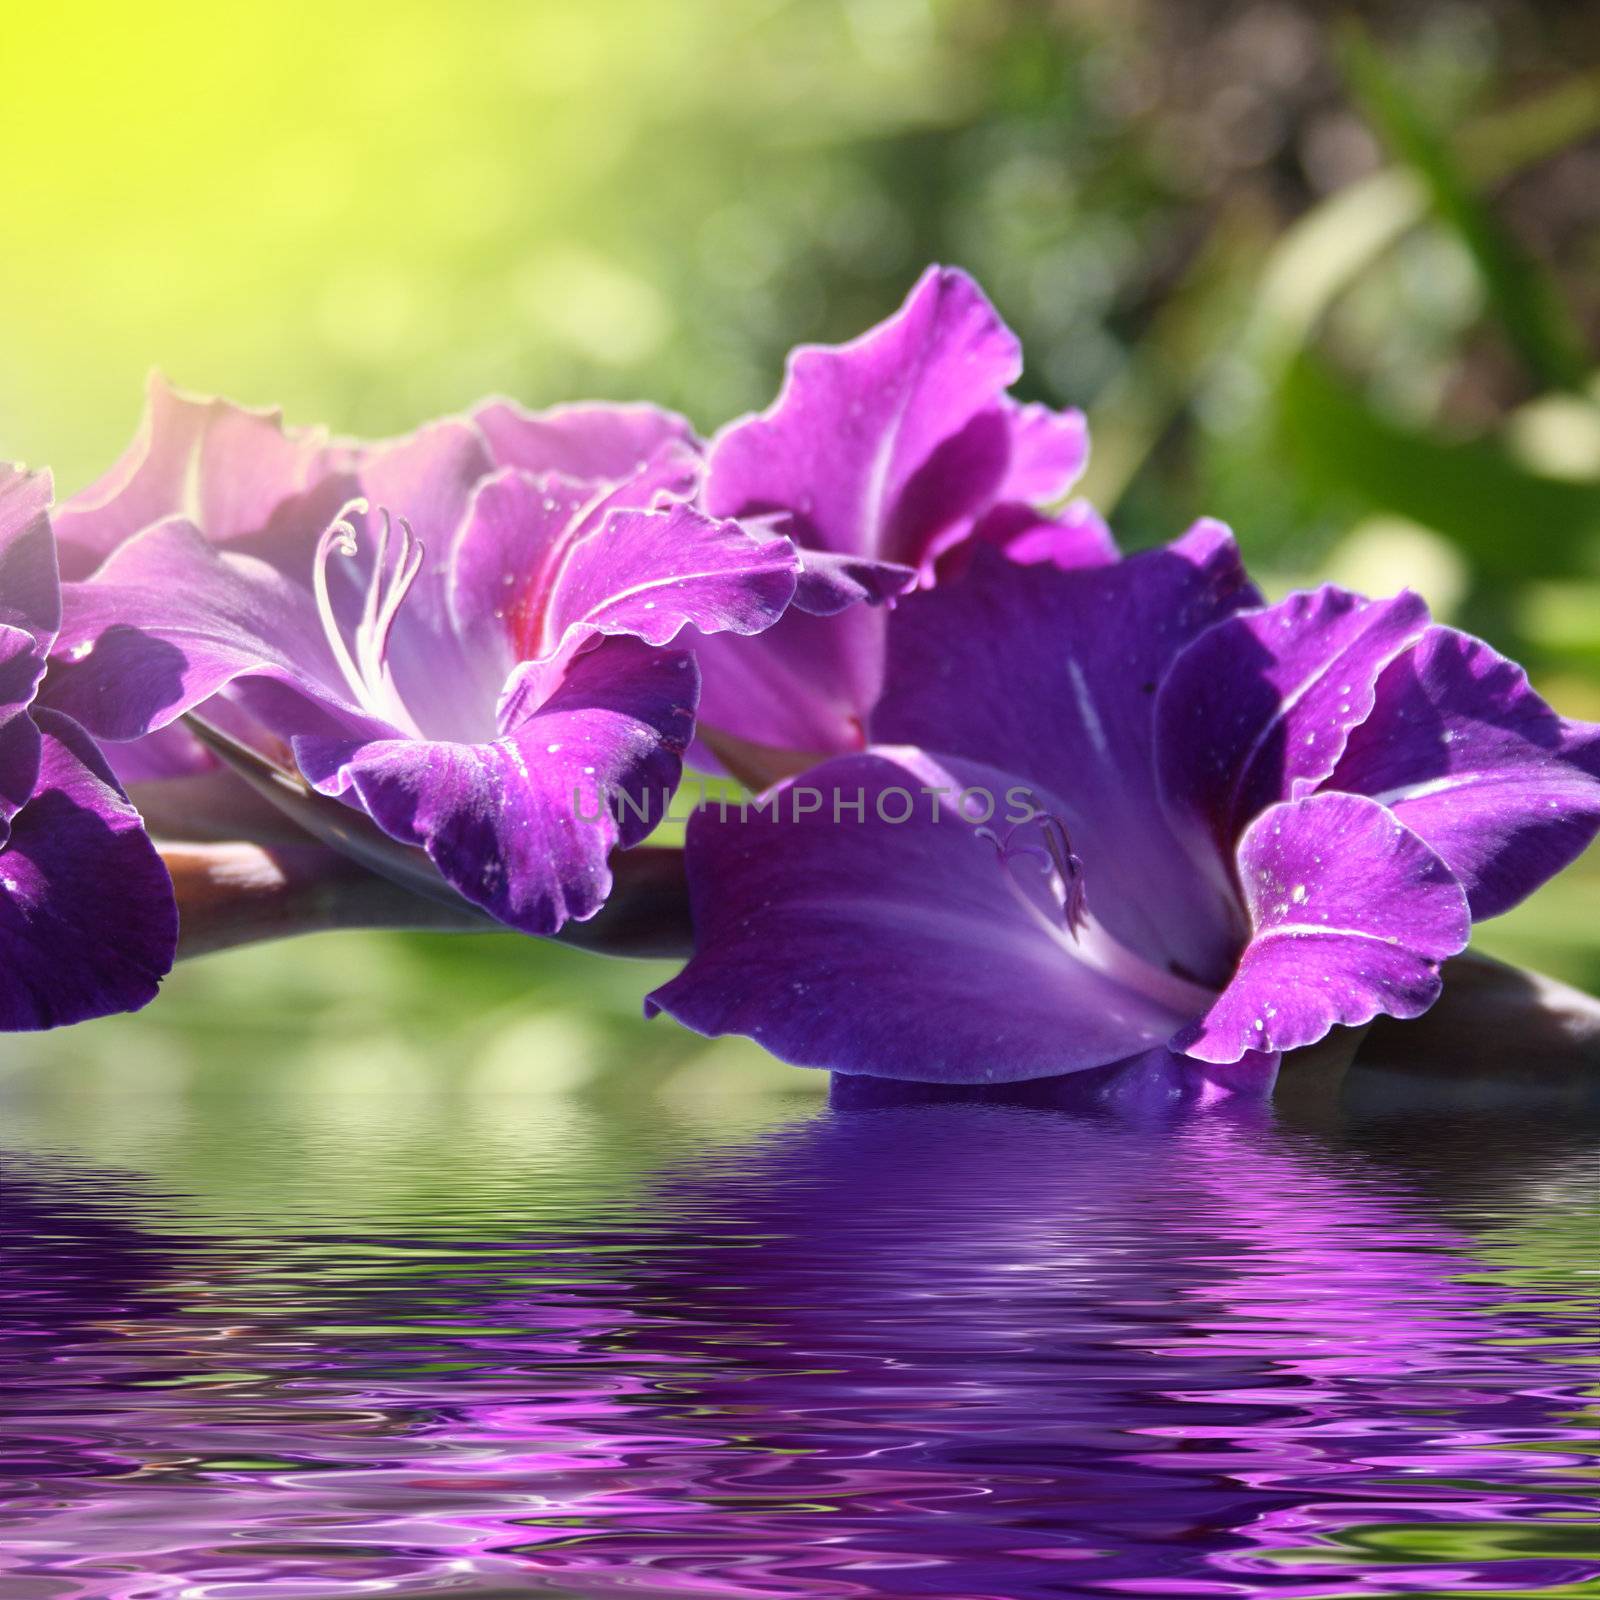 gladiolus in the water by photochecker